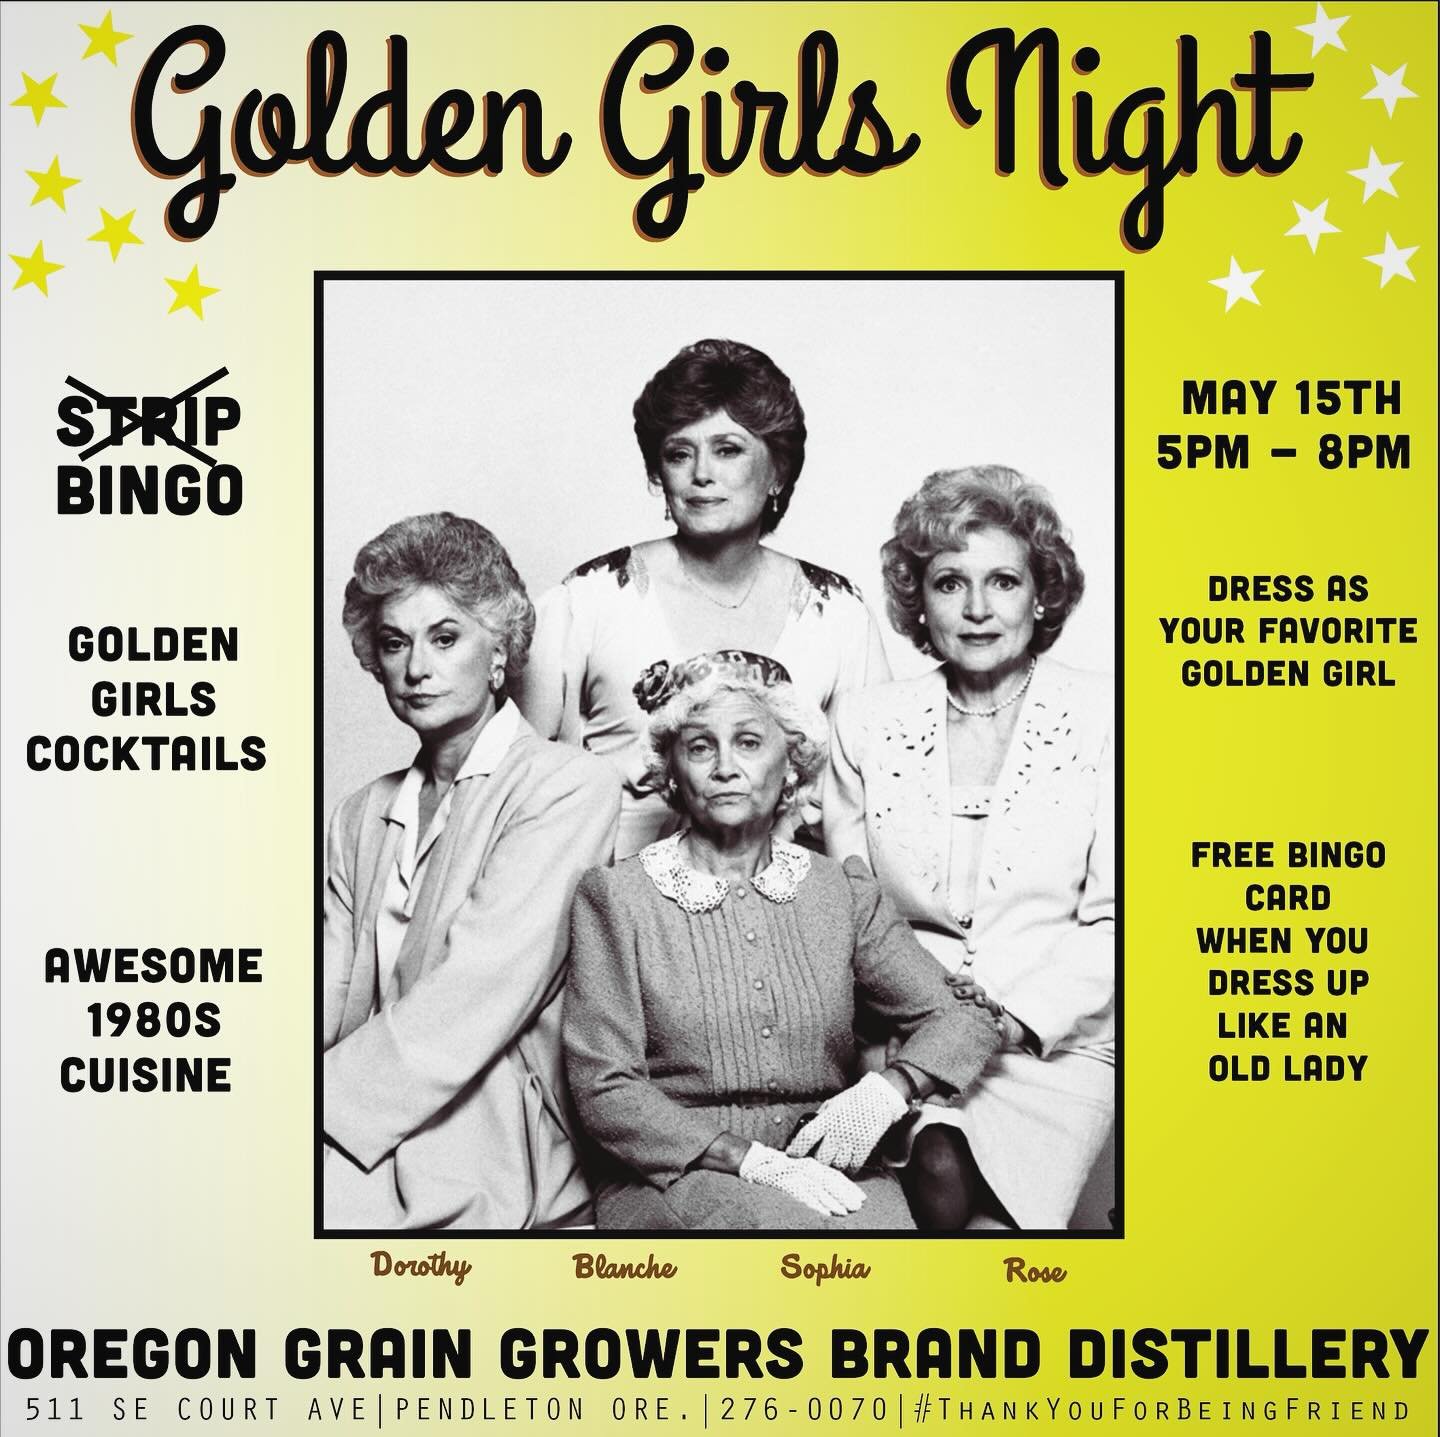 Join us for a wild night of Golden Girls with Golden Girl themed cocktails maybe some 1980s themed food. S̶t̶r̶i̶p̶ Bingo will be going on in the bar. Dress up like a Golden Girl get a free bingo card. We will have bingo prizes, ask Shelby what they 